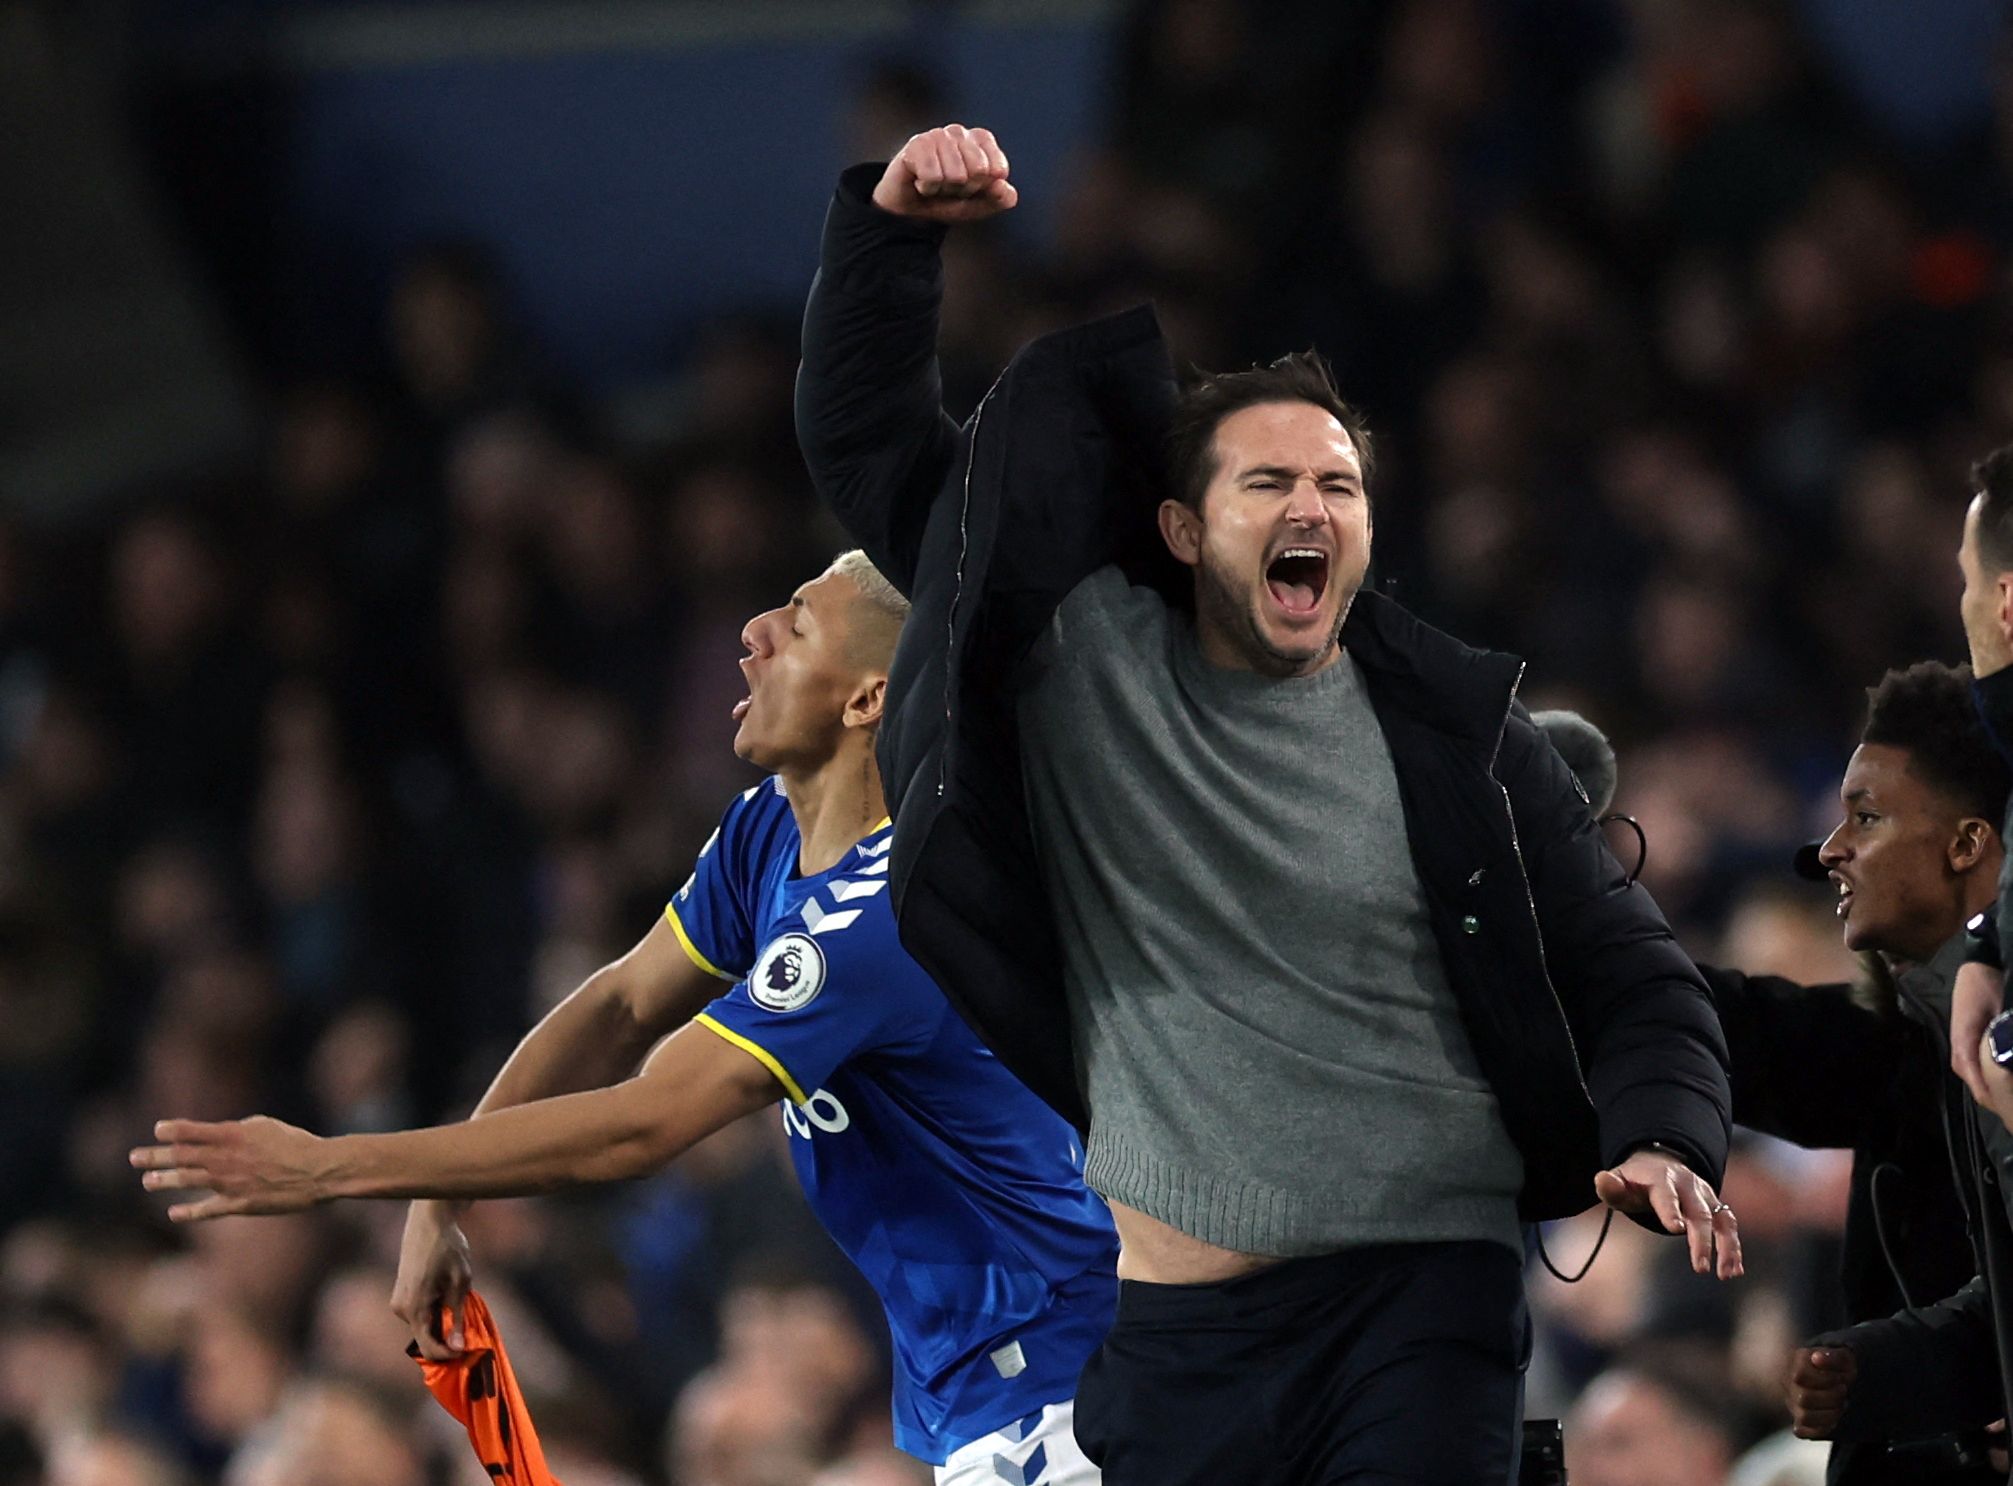 Soccer Football - Premier League - Everton v Newcastle United - Goodison Park, Liverpool, Britain - March 17, 2022 Everton manager Frank Lampard and Richarlison celebrate after the match Action Images via Reuters/Lee Smith EDITORIAL USE ONLY. No use with unauthorized audio, video, data, fixture lists, club/league logos or 'live' services. Online in-match use limited to 75 images, no video emulation. No use in betting, games or single club /league/player publications.  Please contact your account